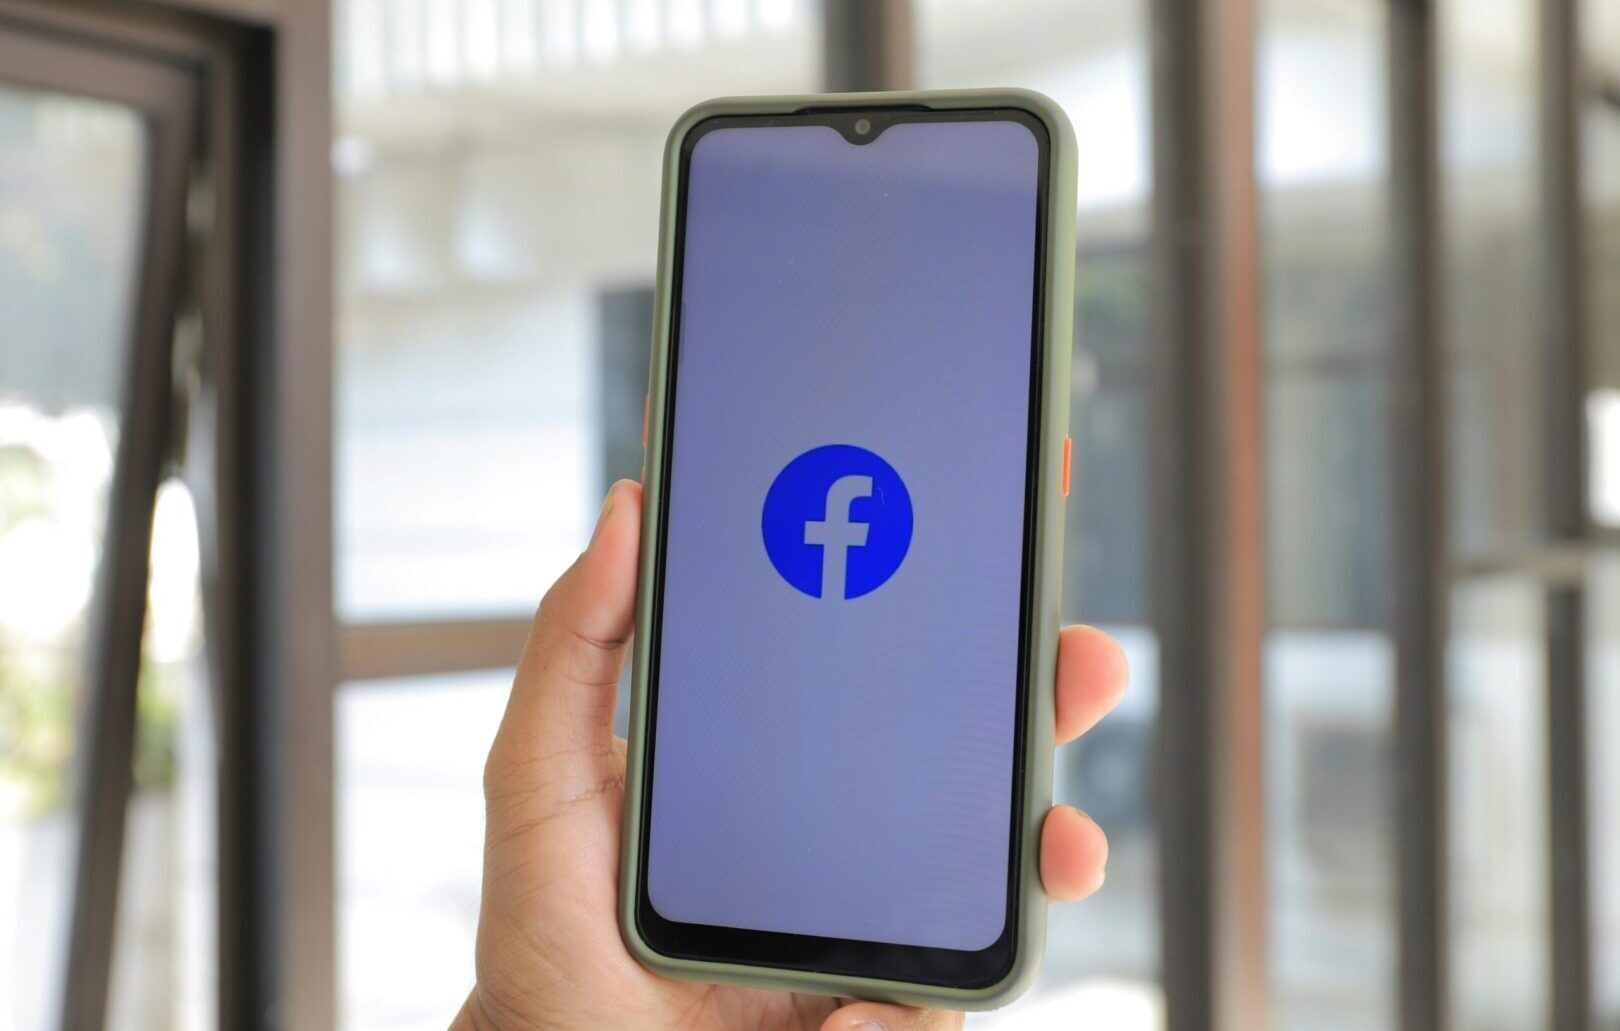 facebook app opening screen on a smartphone